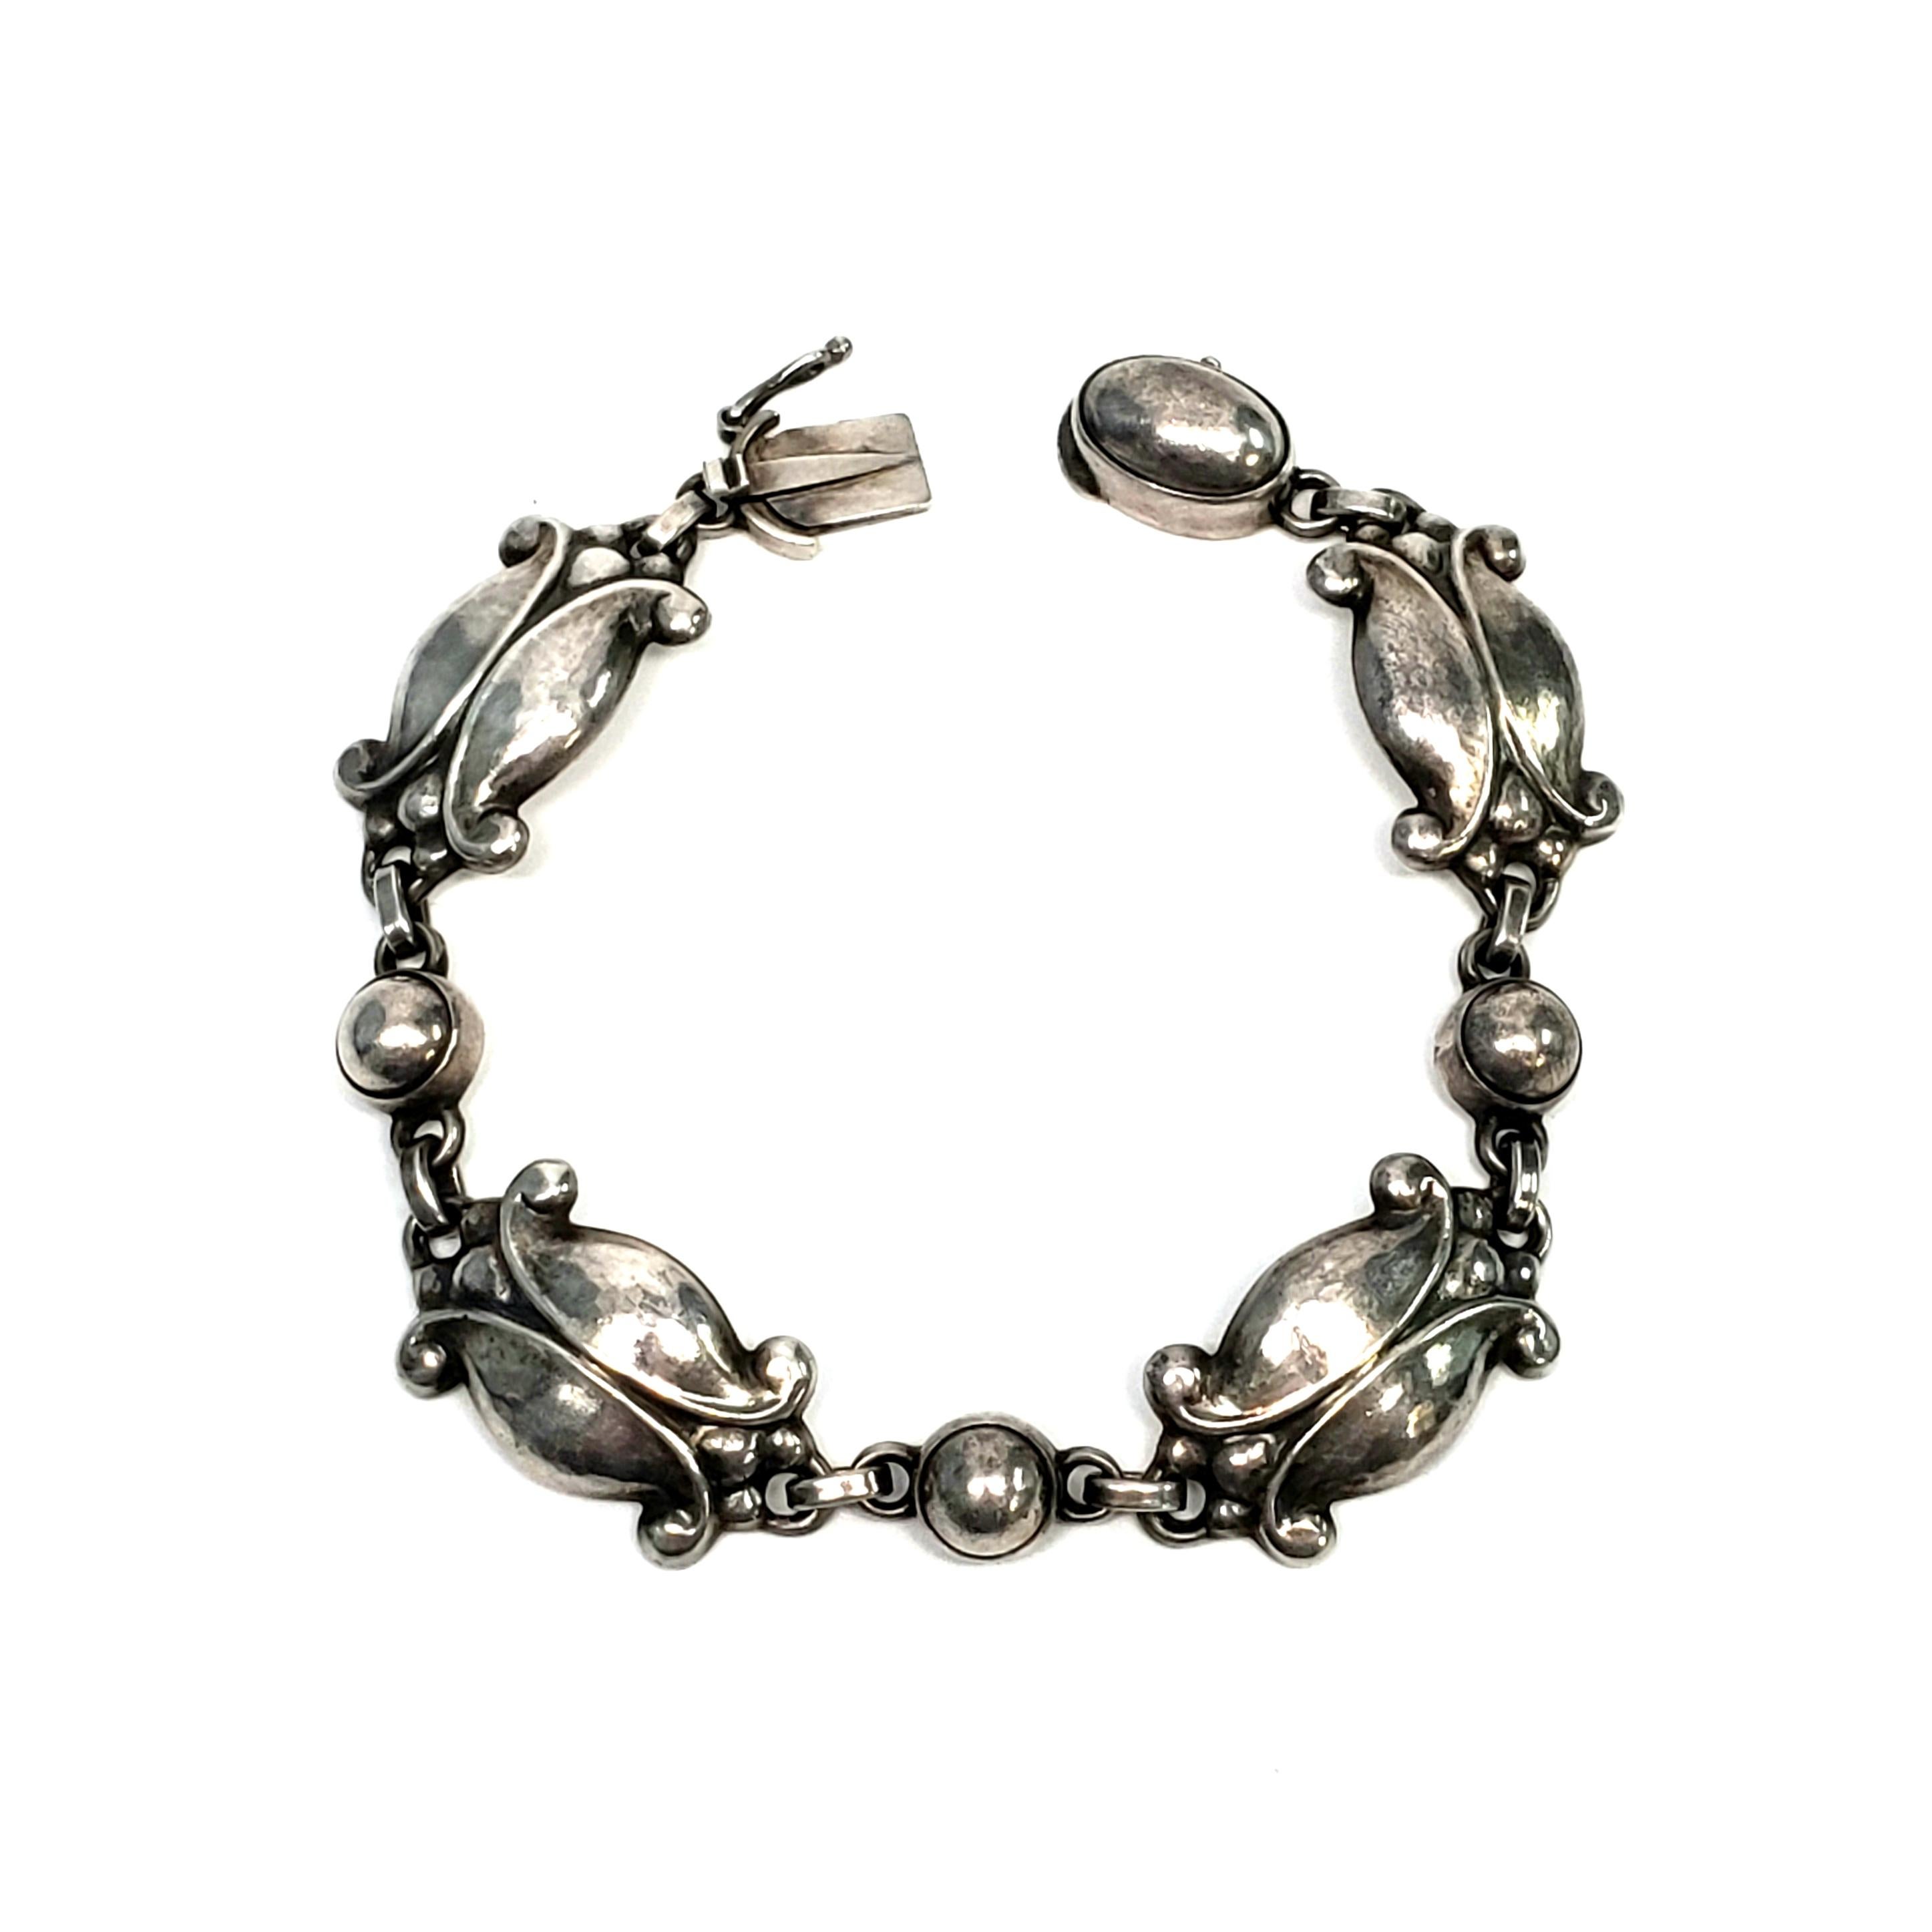 Vintage Georg Jensen sterling silver bracelet in the Moonlight Blossom pattern, #11, circa 1945.

The Moonlight Blossom pattern was designed by Georg Jensen himself, inspired by nature motifs, as is typical of Georg Jensen's work. This beautiful